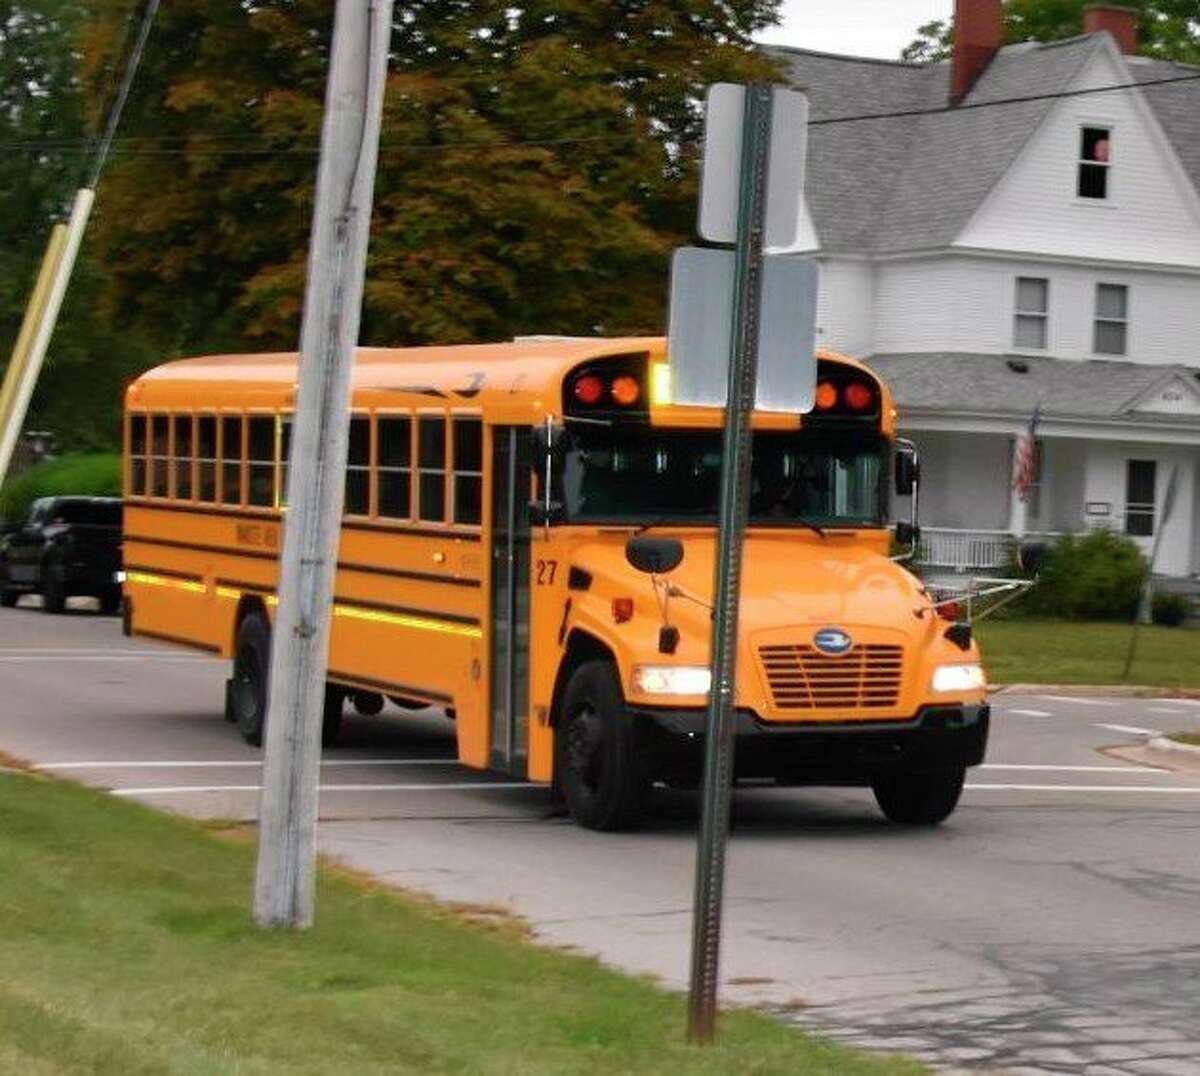 Manistee Area Public Schools was made aware of eight cases of COVID-19 within the district, according to an email sent out to staff and families by superintendent Ron Stoneman Friday morning.